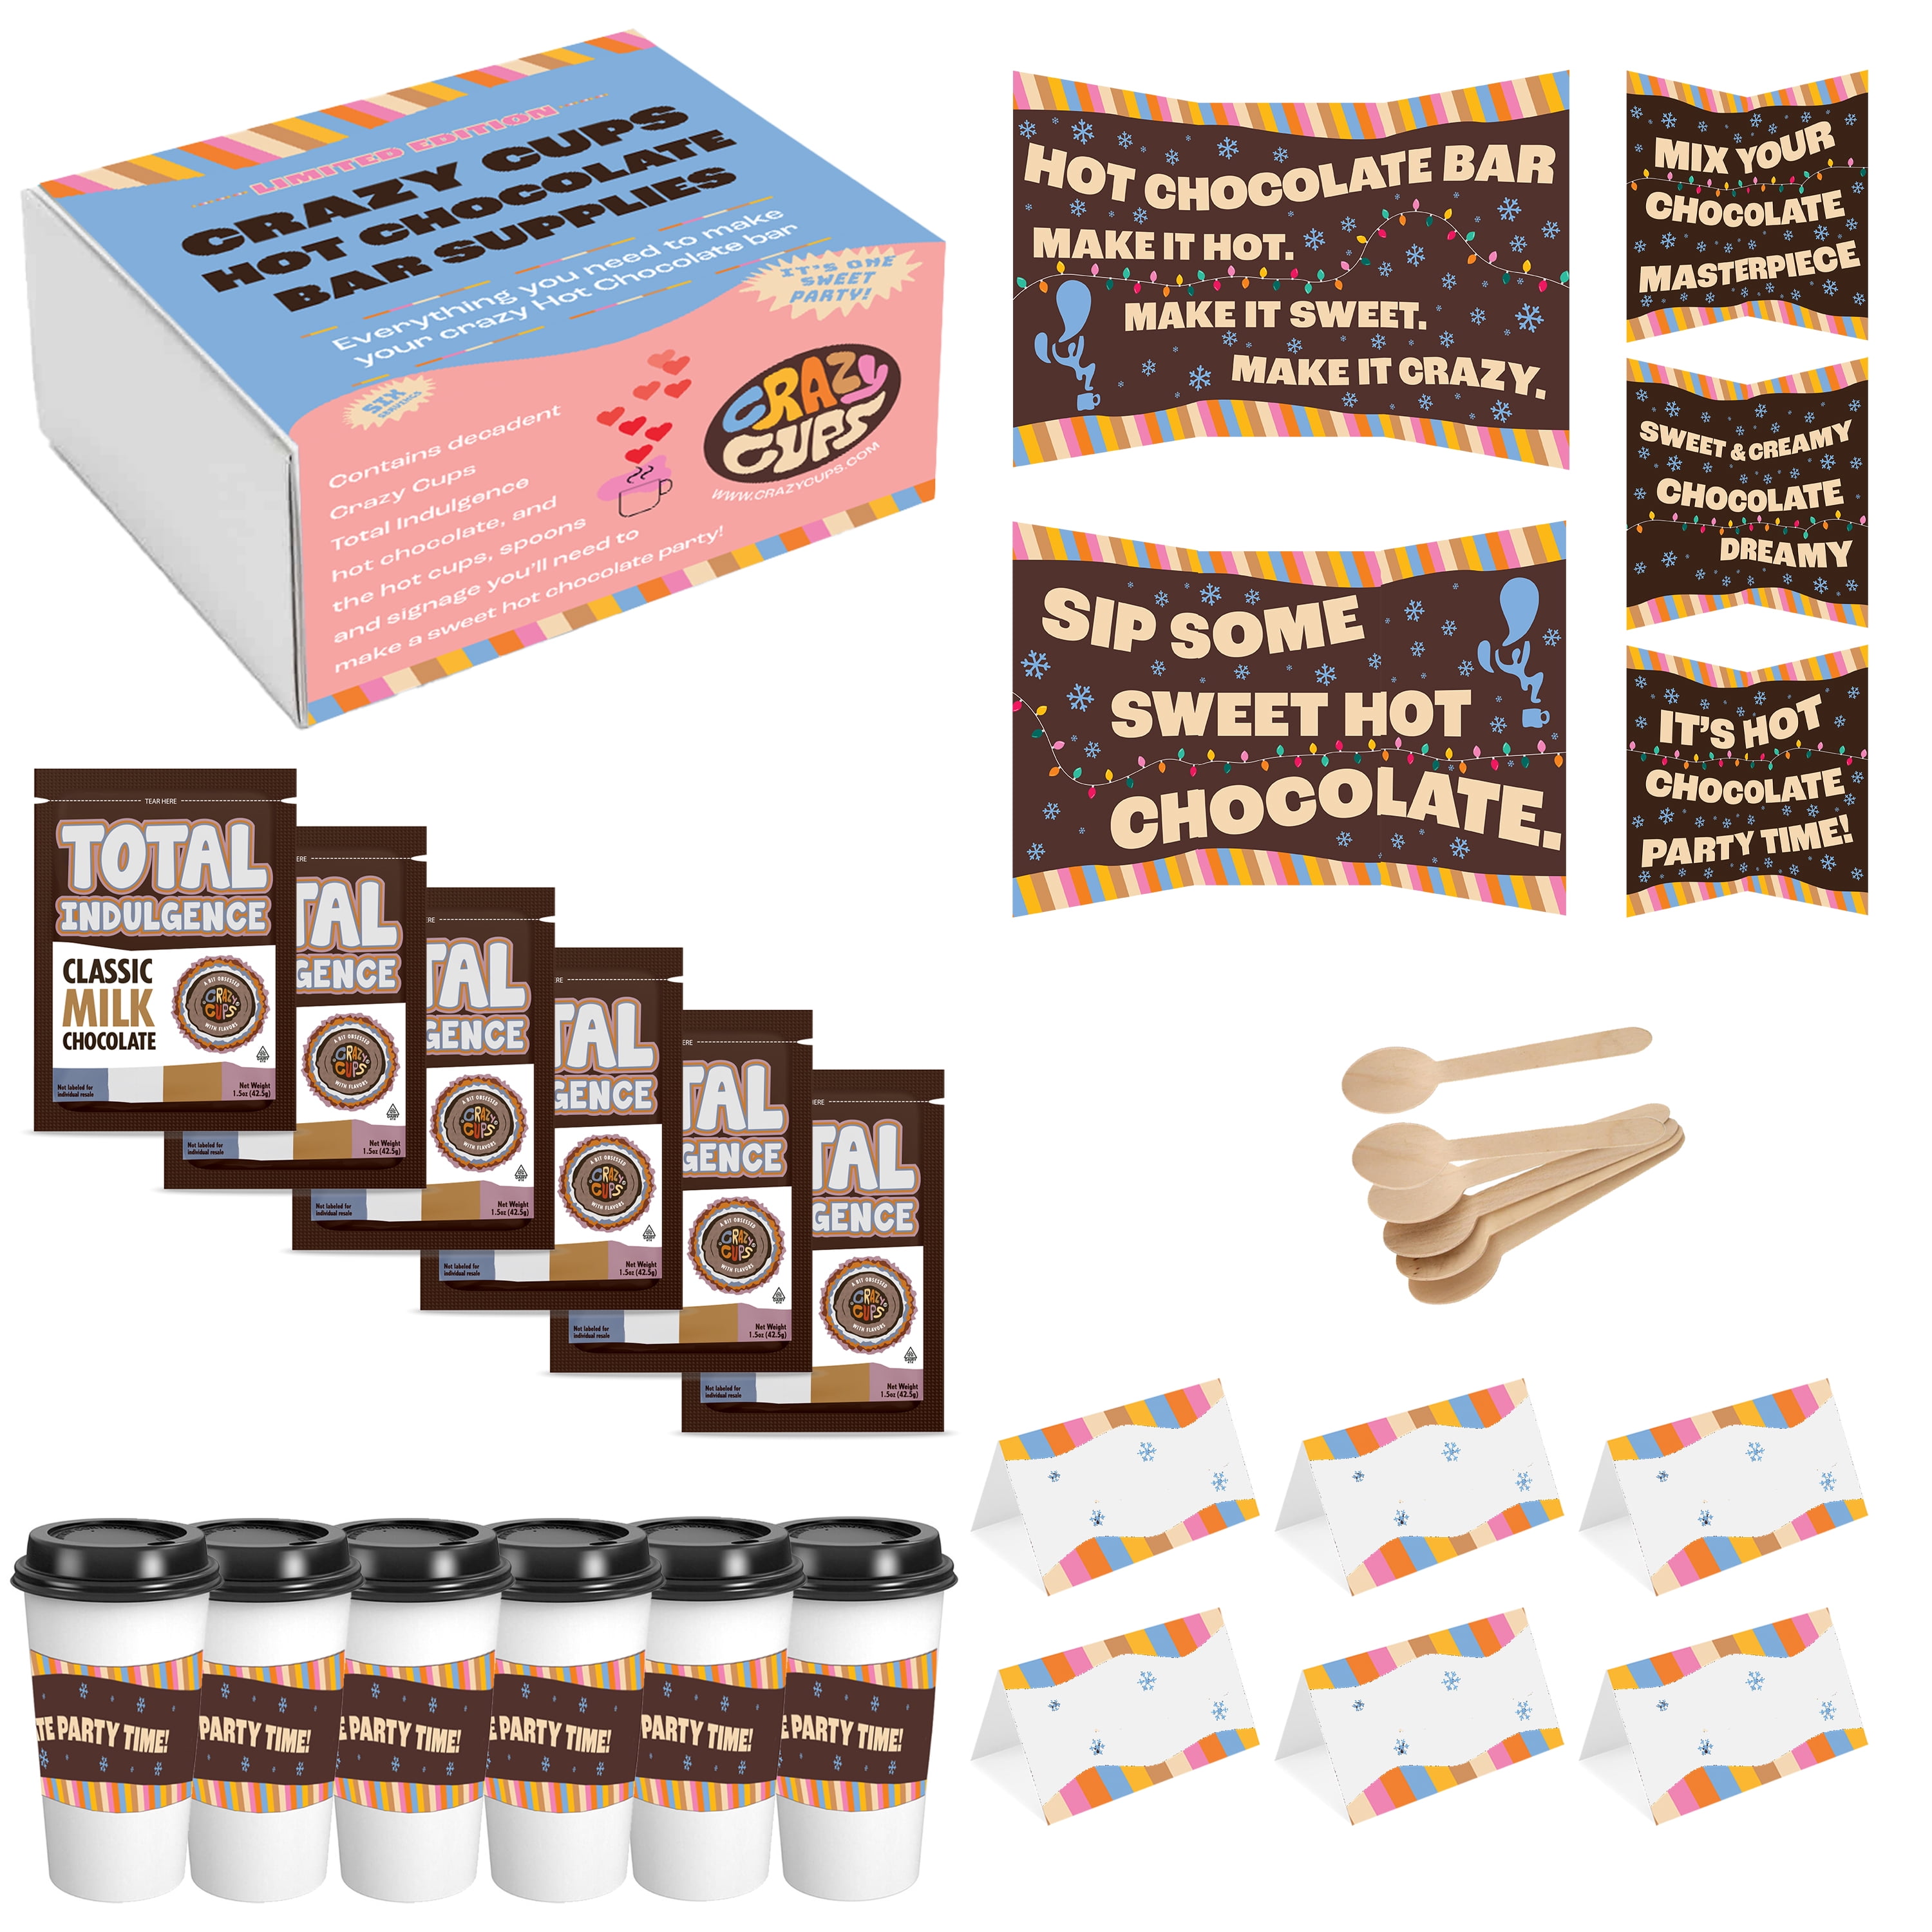 Crazy Cups Hot Cocoa Bar Supplies Kit, Limited Edition Hot